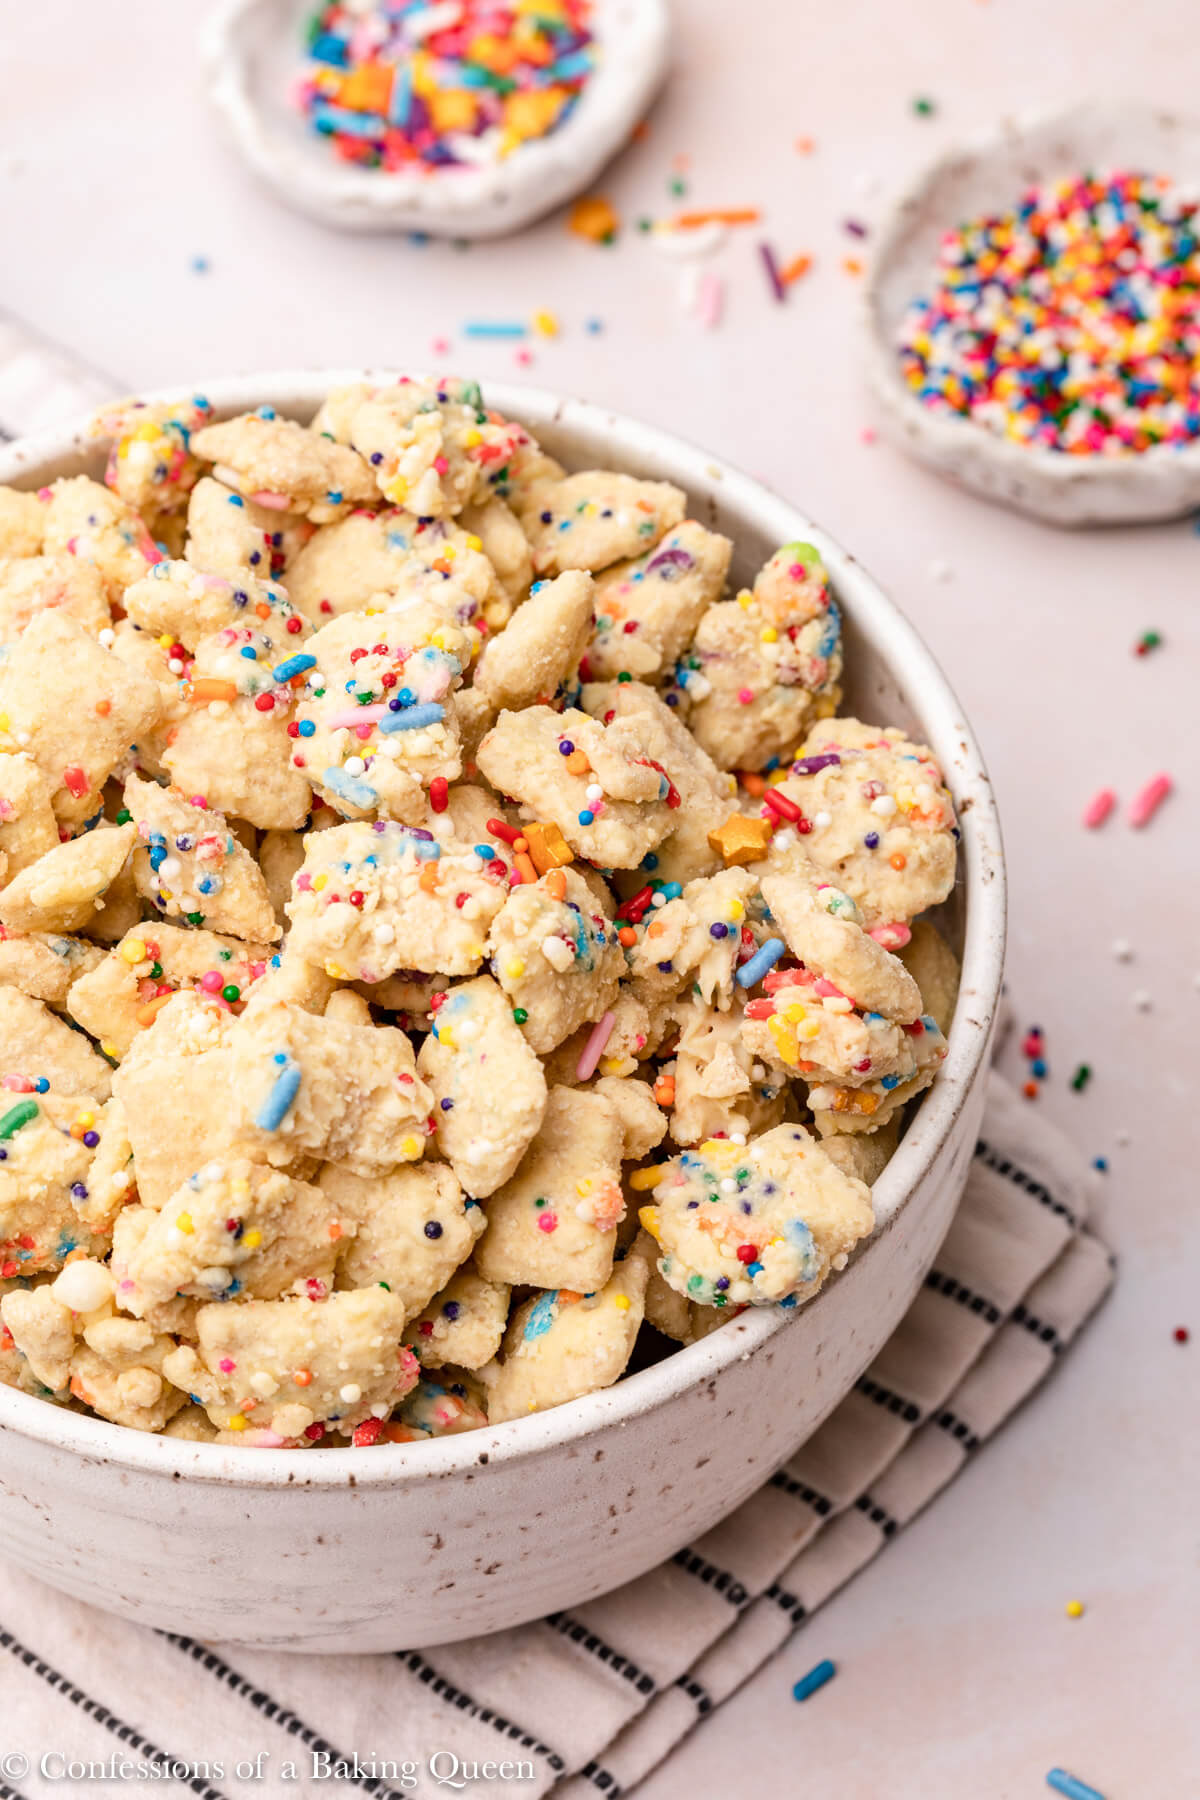 cake batter muddy buddies in a large white bowl on top of a white and blue napkin on a light pink surface